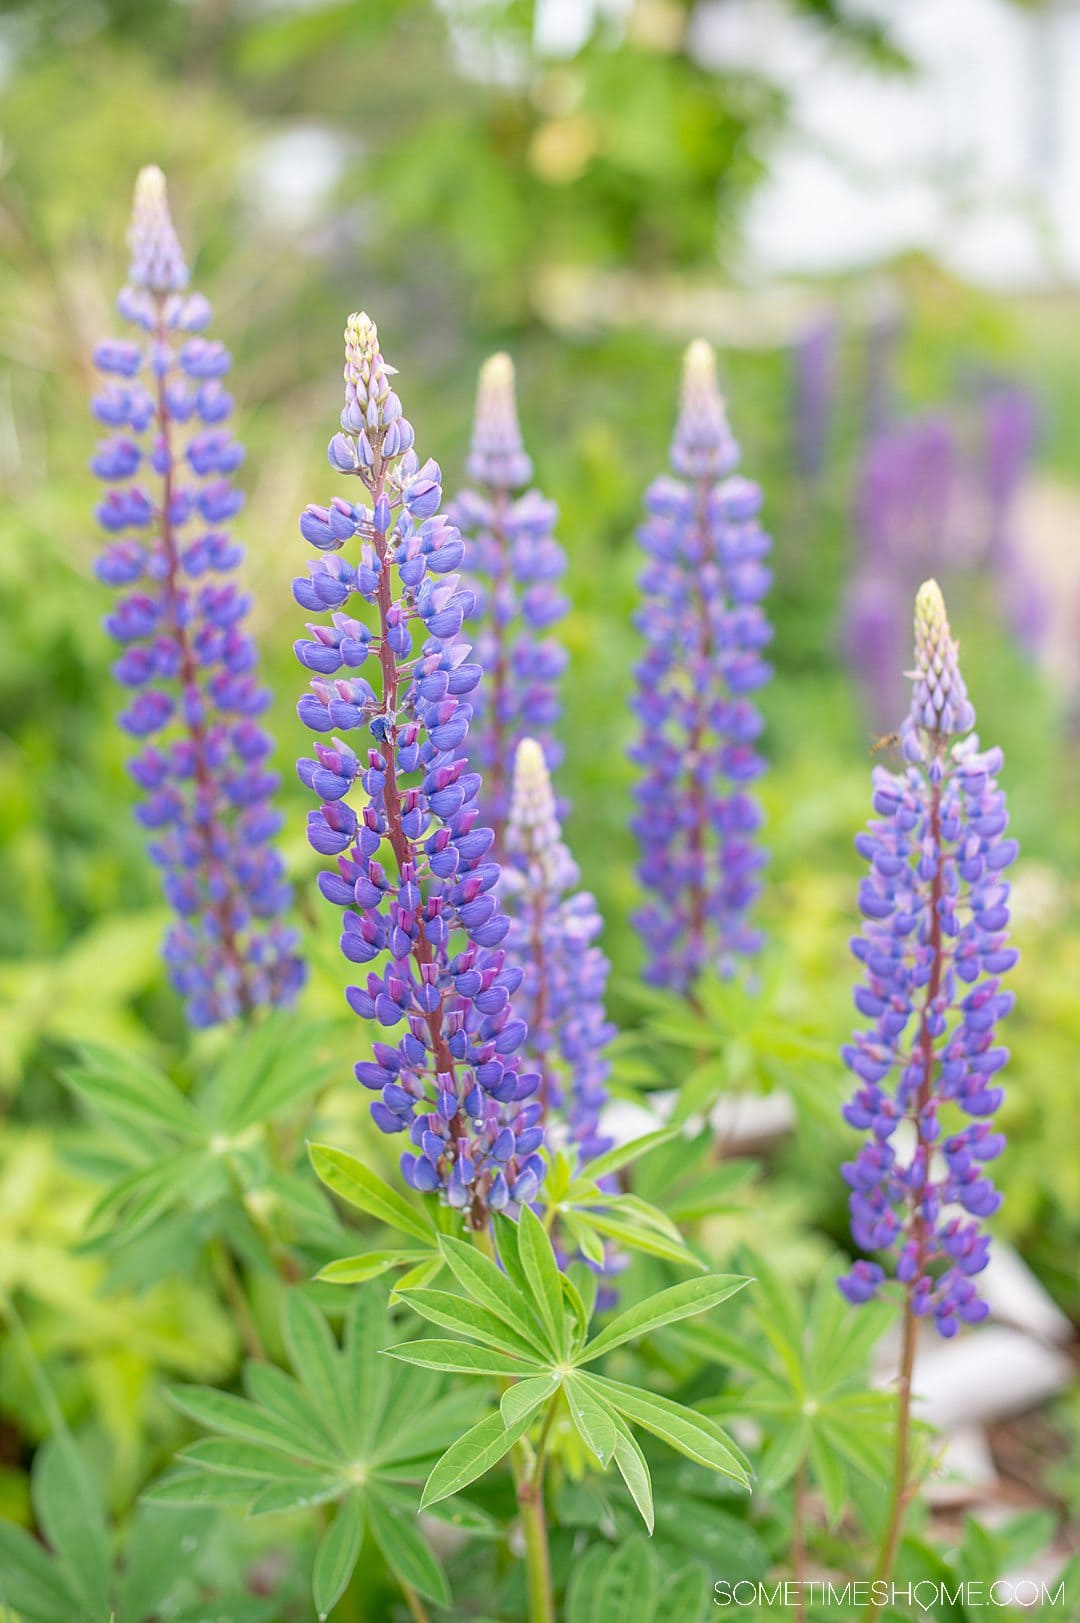 Purple Lupine flowers in Maine, during summer.